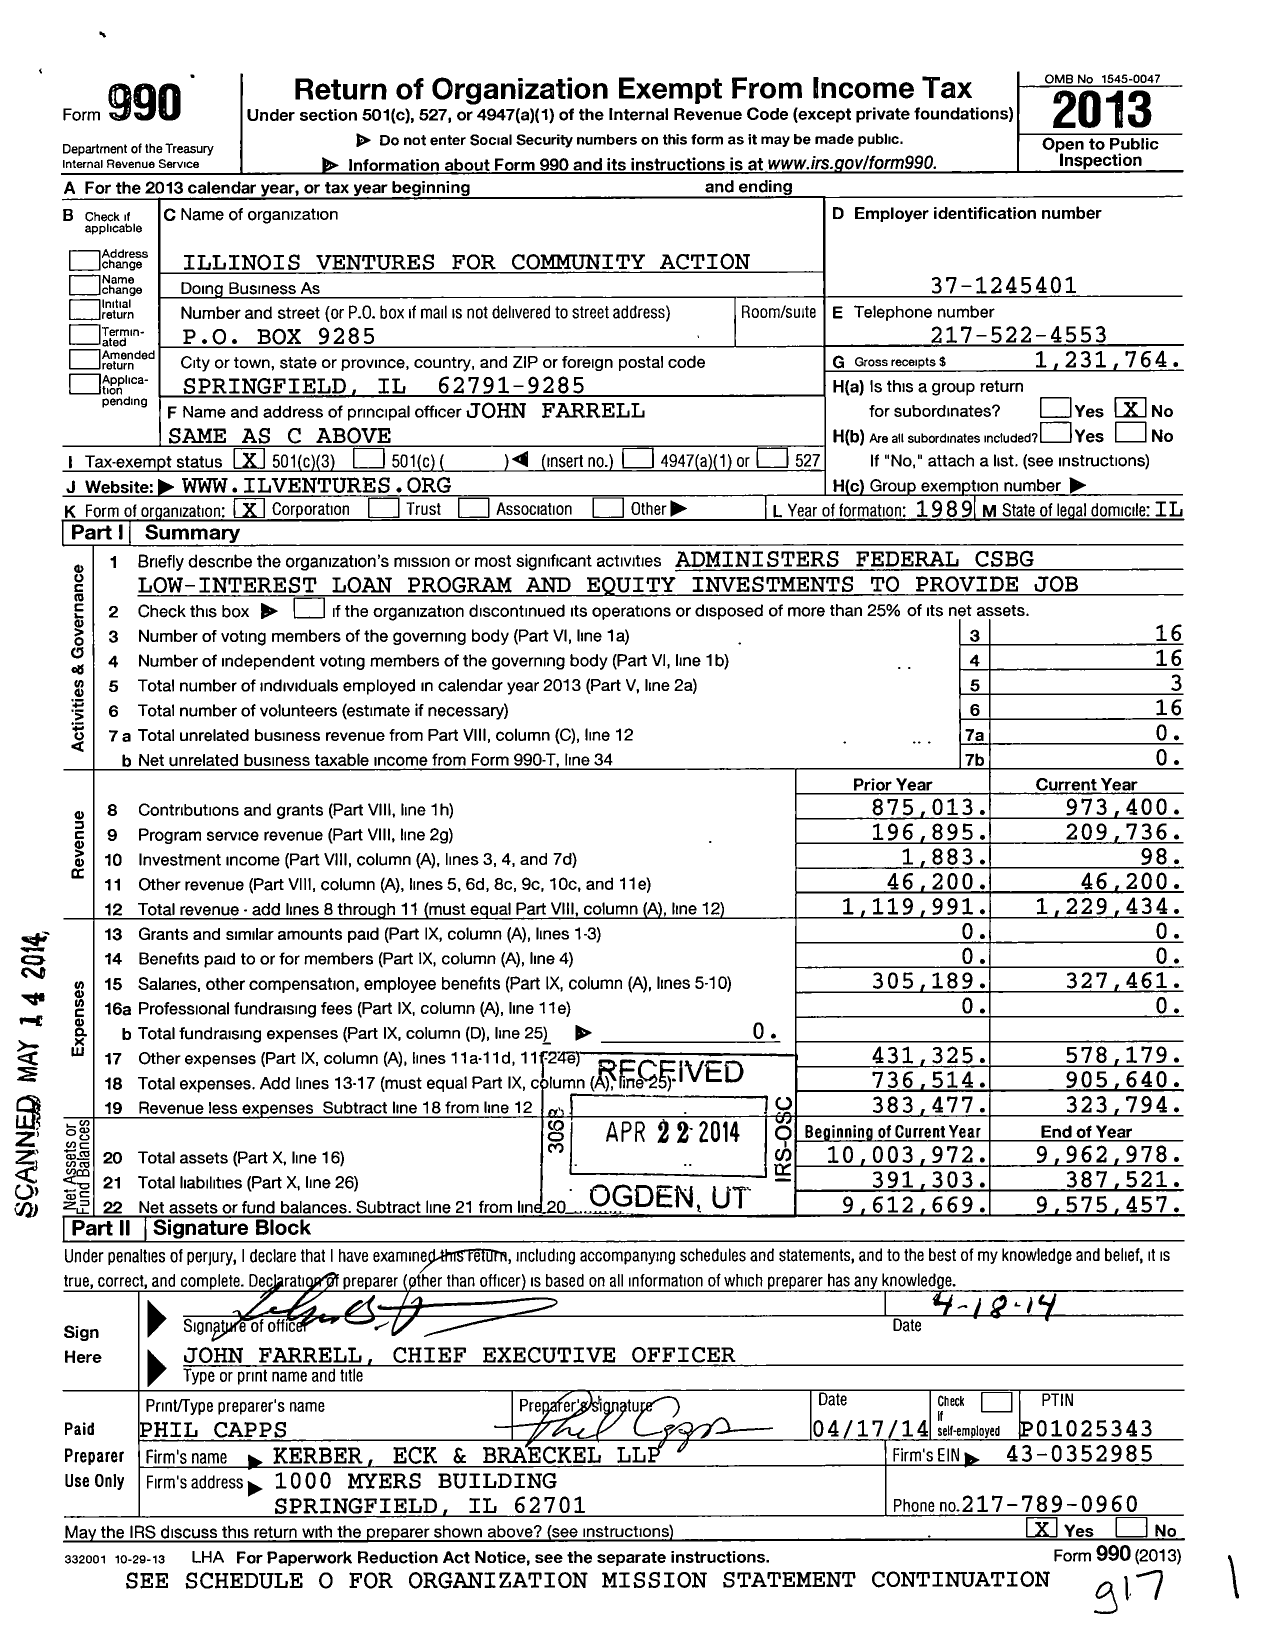 Image of first page of 2013 Form 990 for Illinois Ventures for Community Action